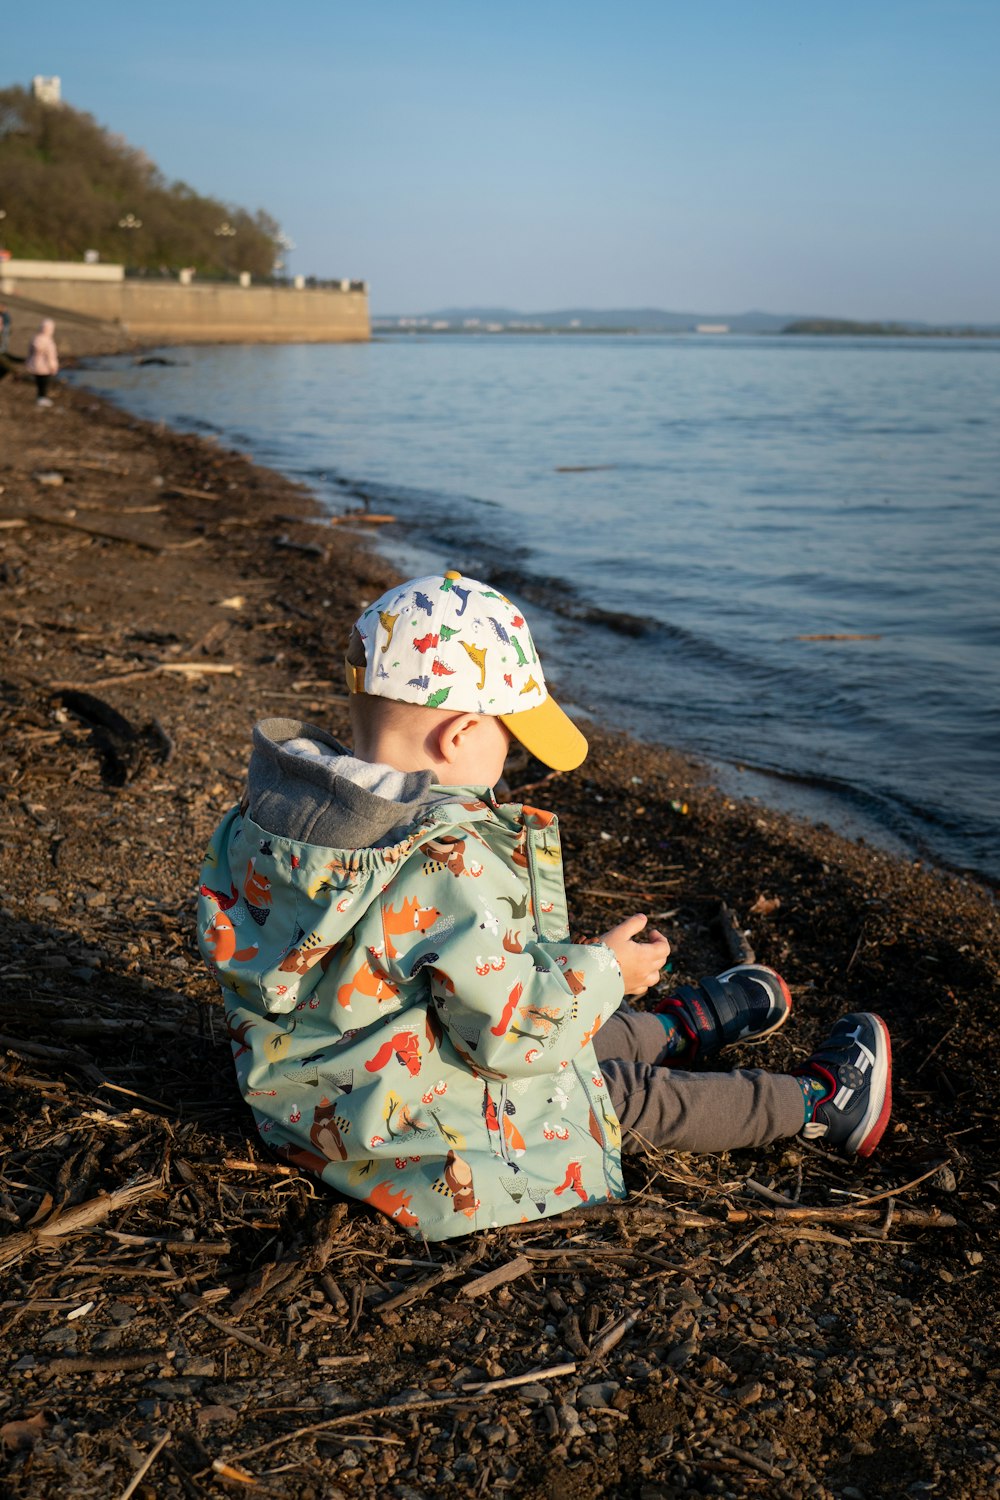 a small child sitting on a beach next to a body of water